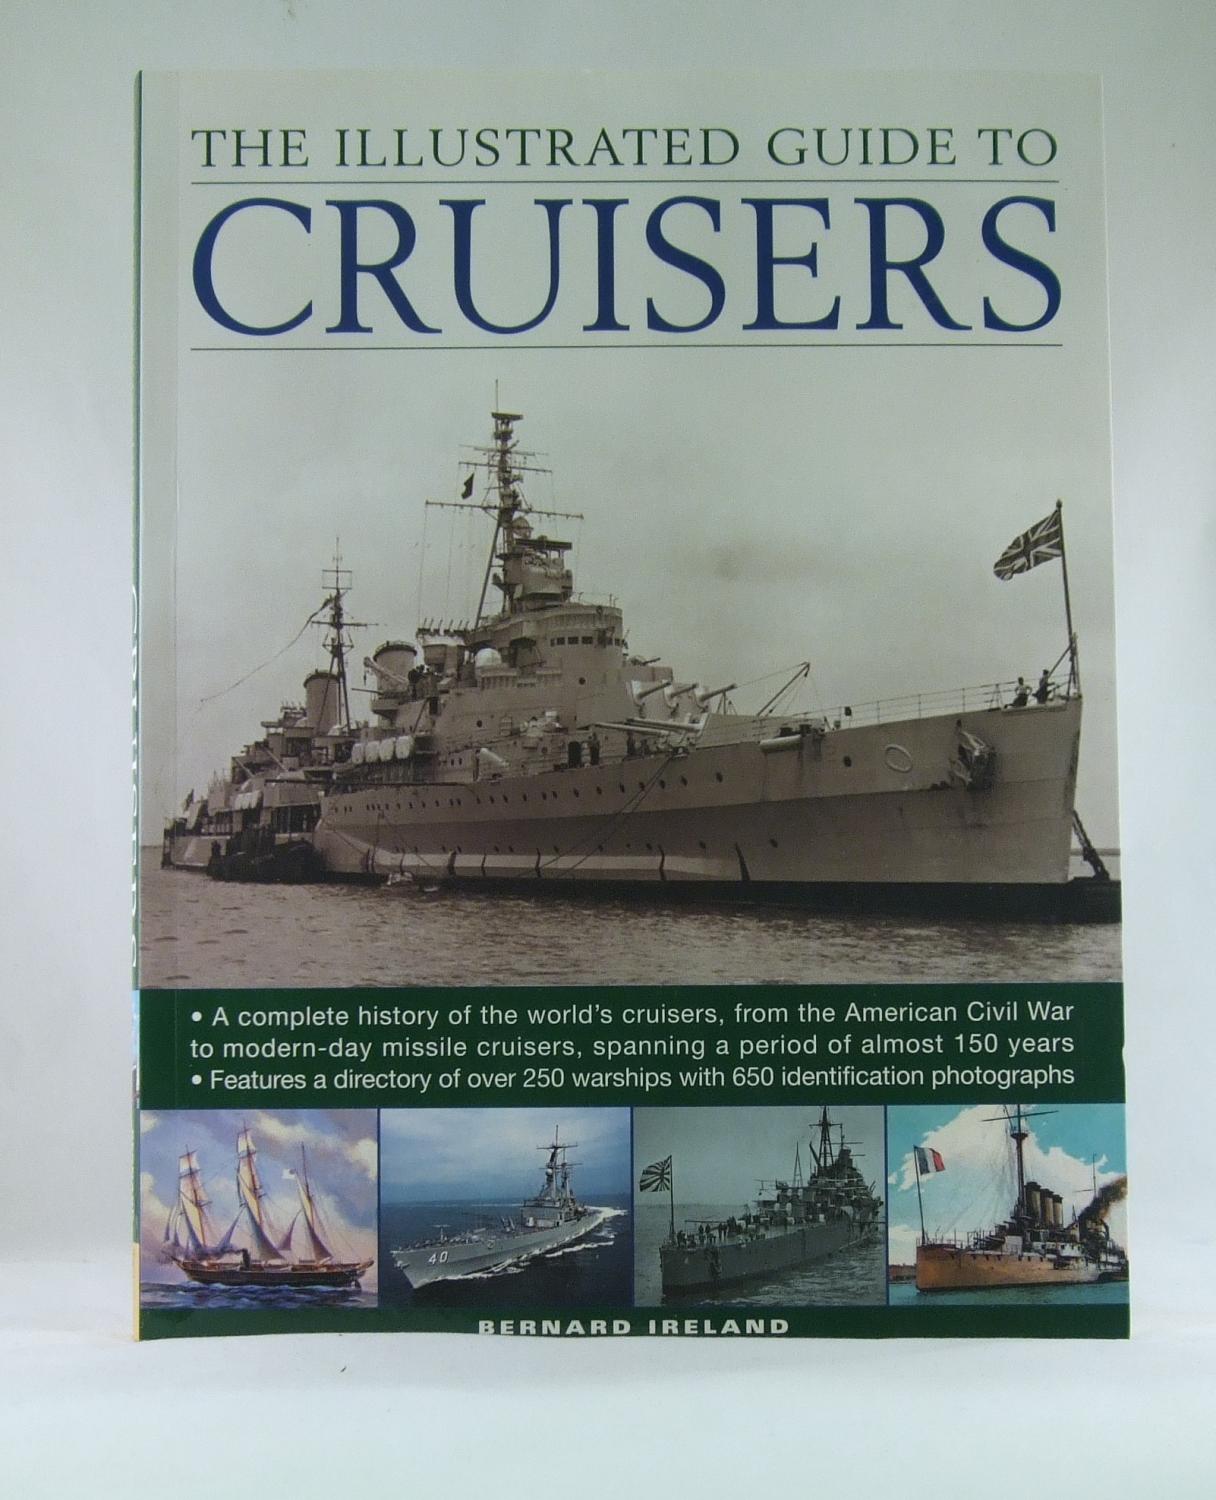 The Illustrated Guide To Cruisers